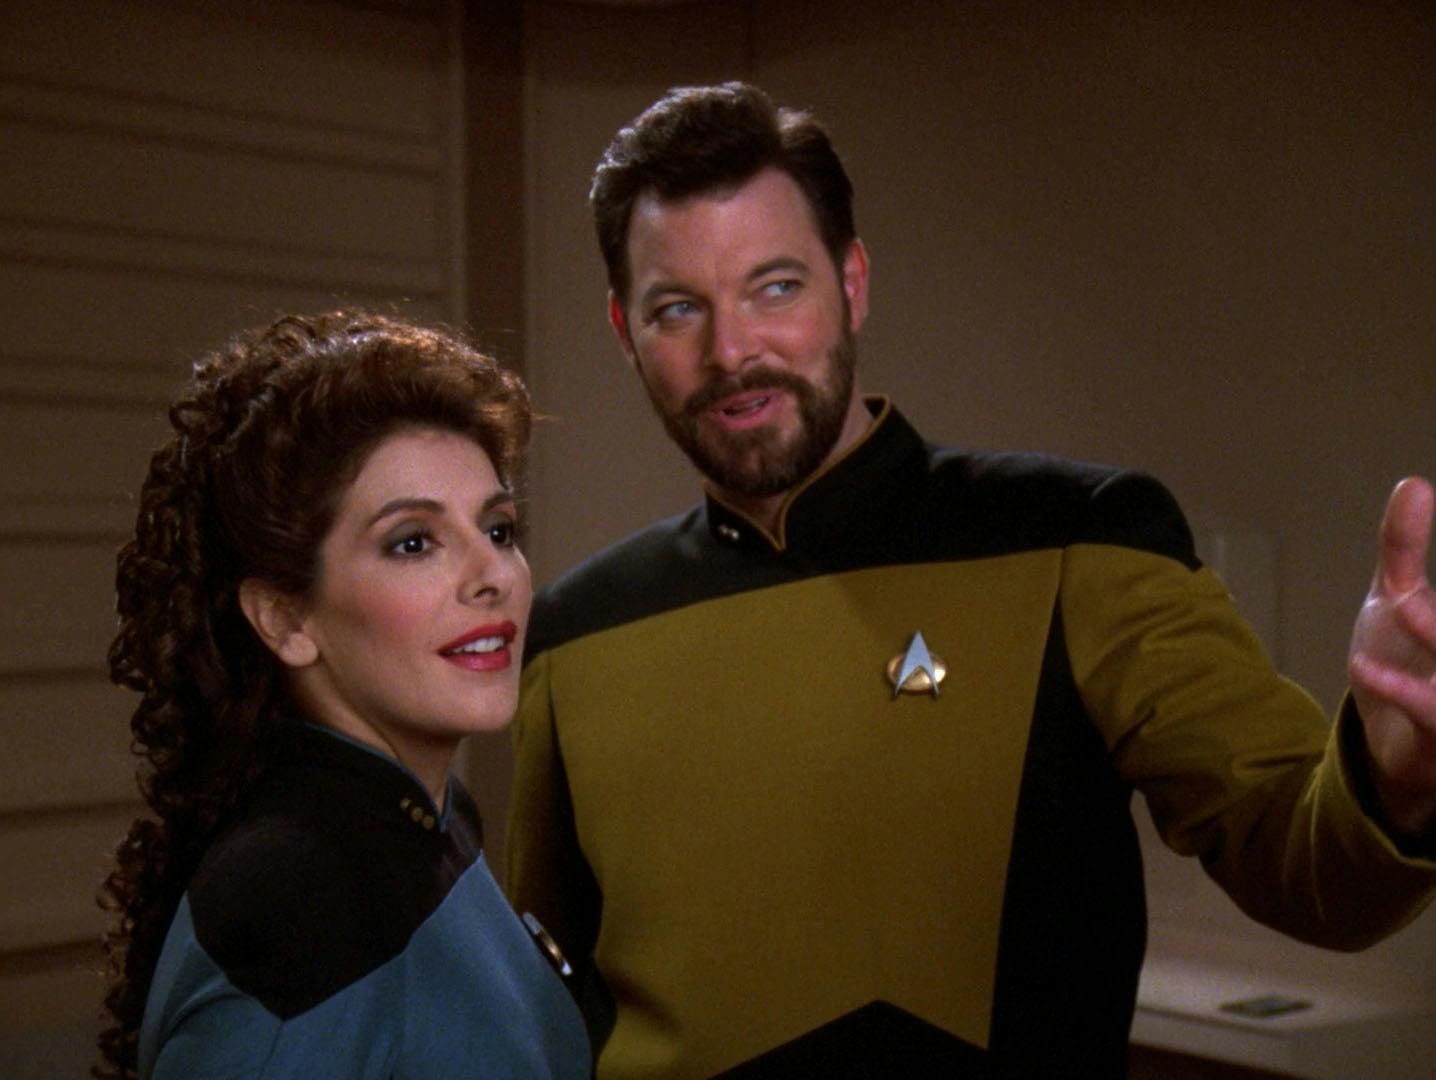 Deanna Troi and Thomas Riker side-by-side, smiling as they look ahead in 'Second Chances'